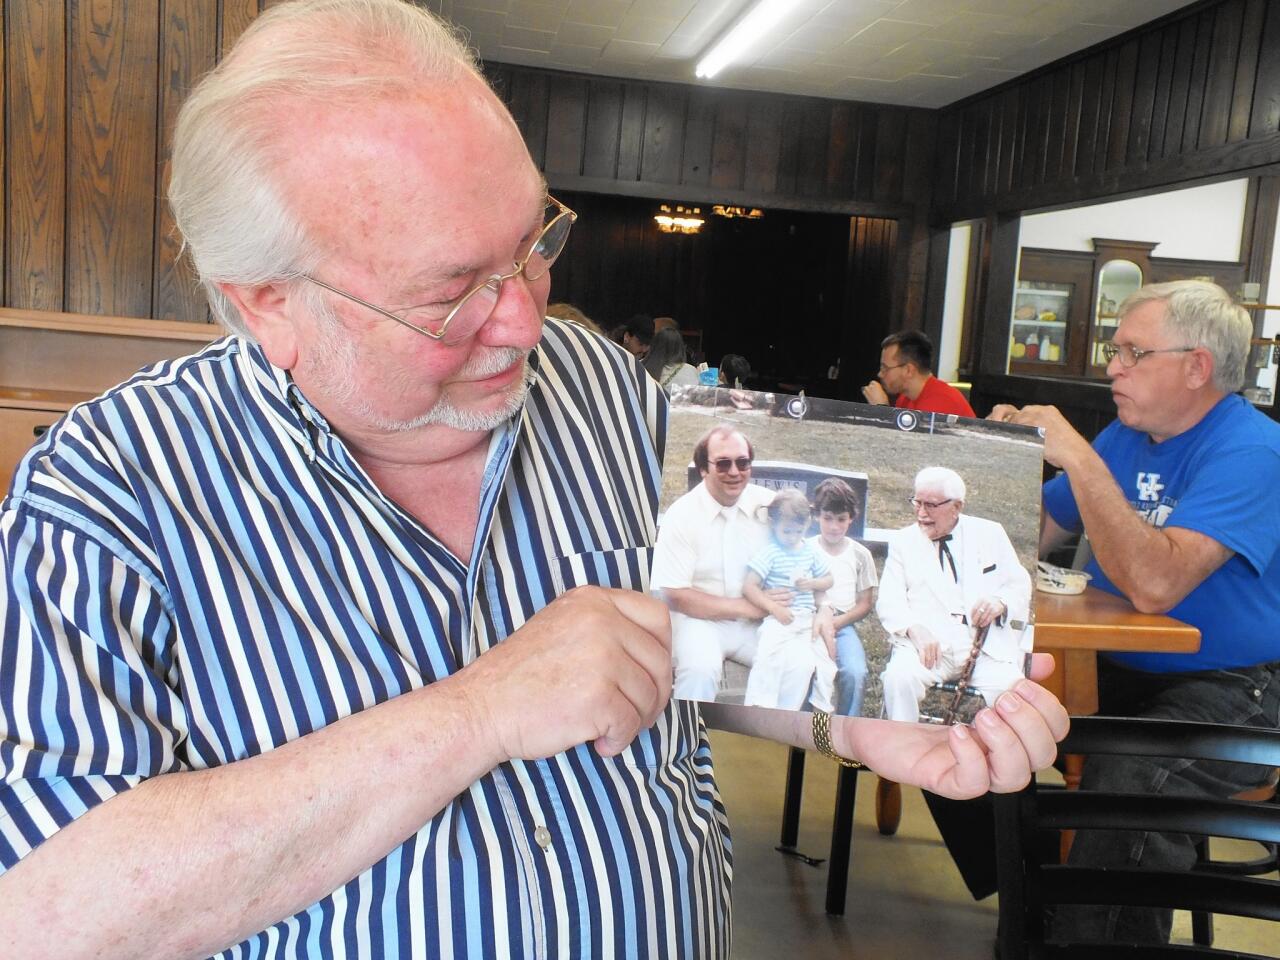 Joe Ledington of Corbin, Ky., displays a 1980s photo of him with his uncle, Colonel Harland Sanders, who perfected his world-famous Kentucky Fried Chicken in his Corbin cafe. The photo is part of a family album.